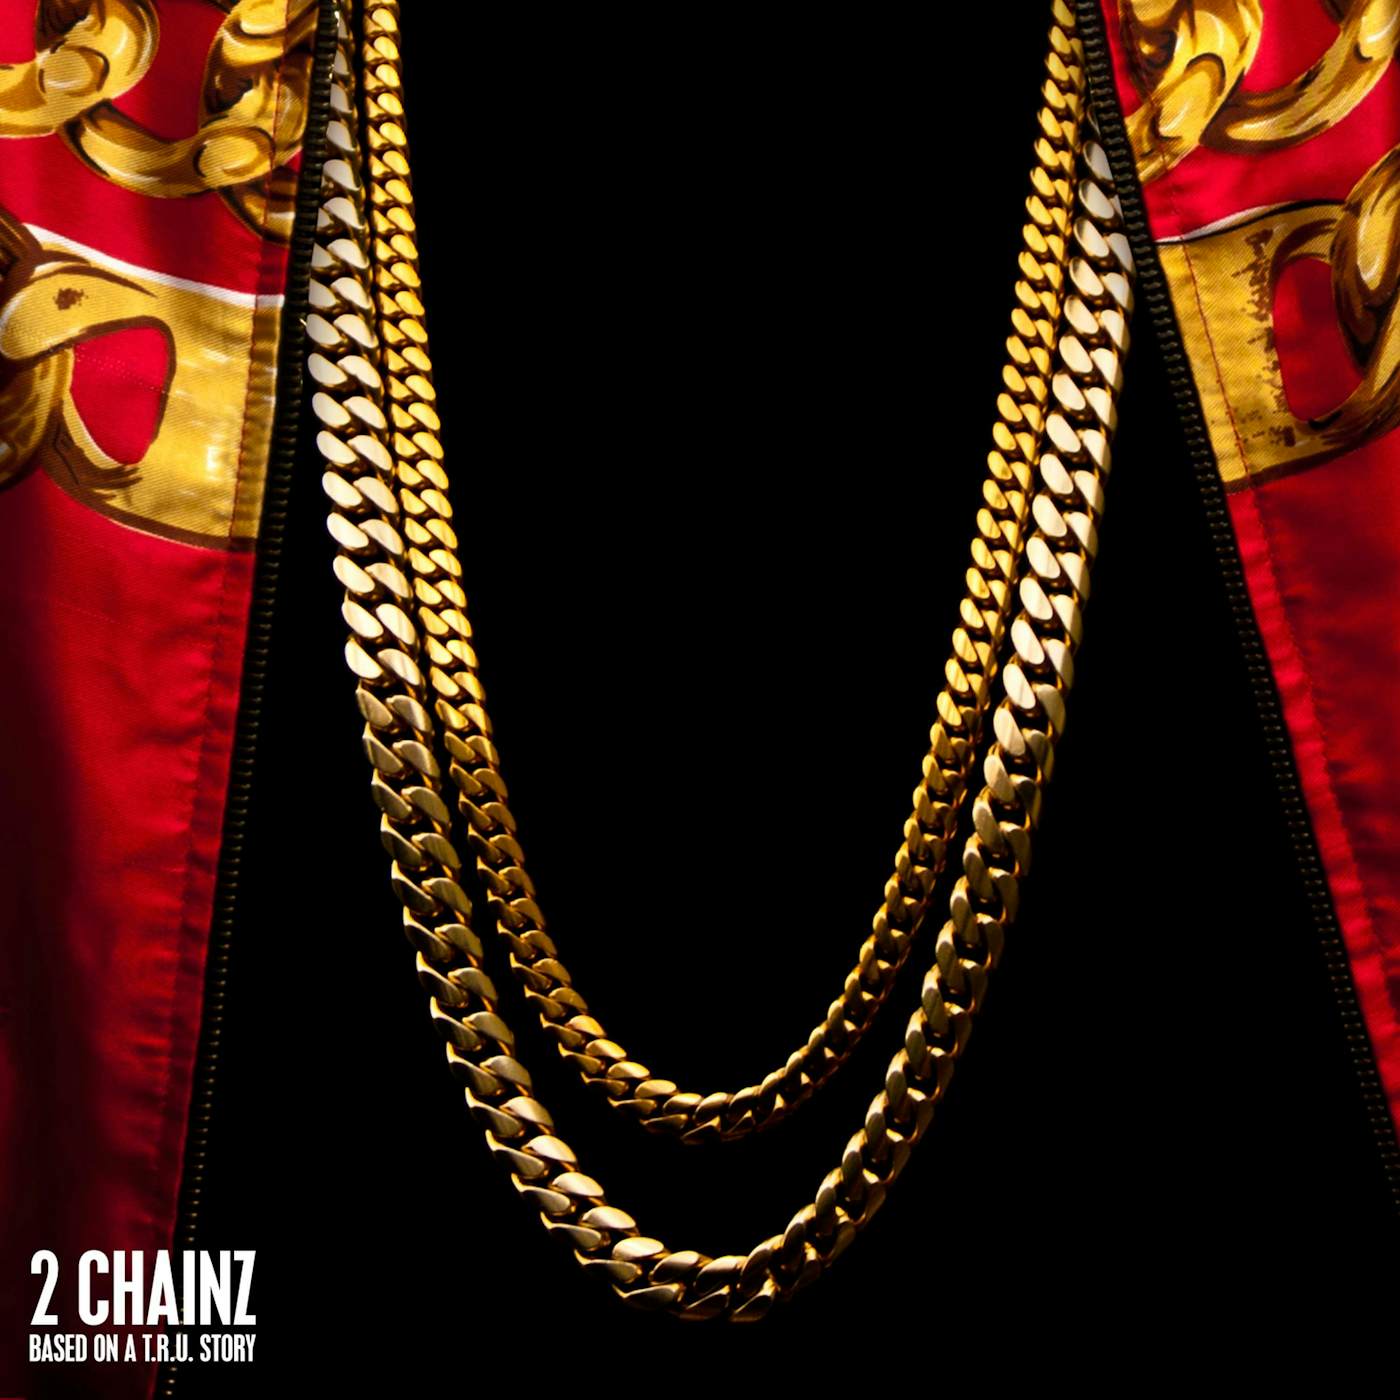 2 Chainz Based On A T.R.U. Story (2 LP)(Explicit) Vinyl Record